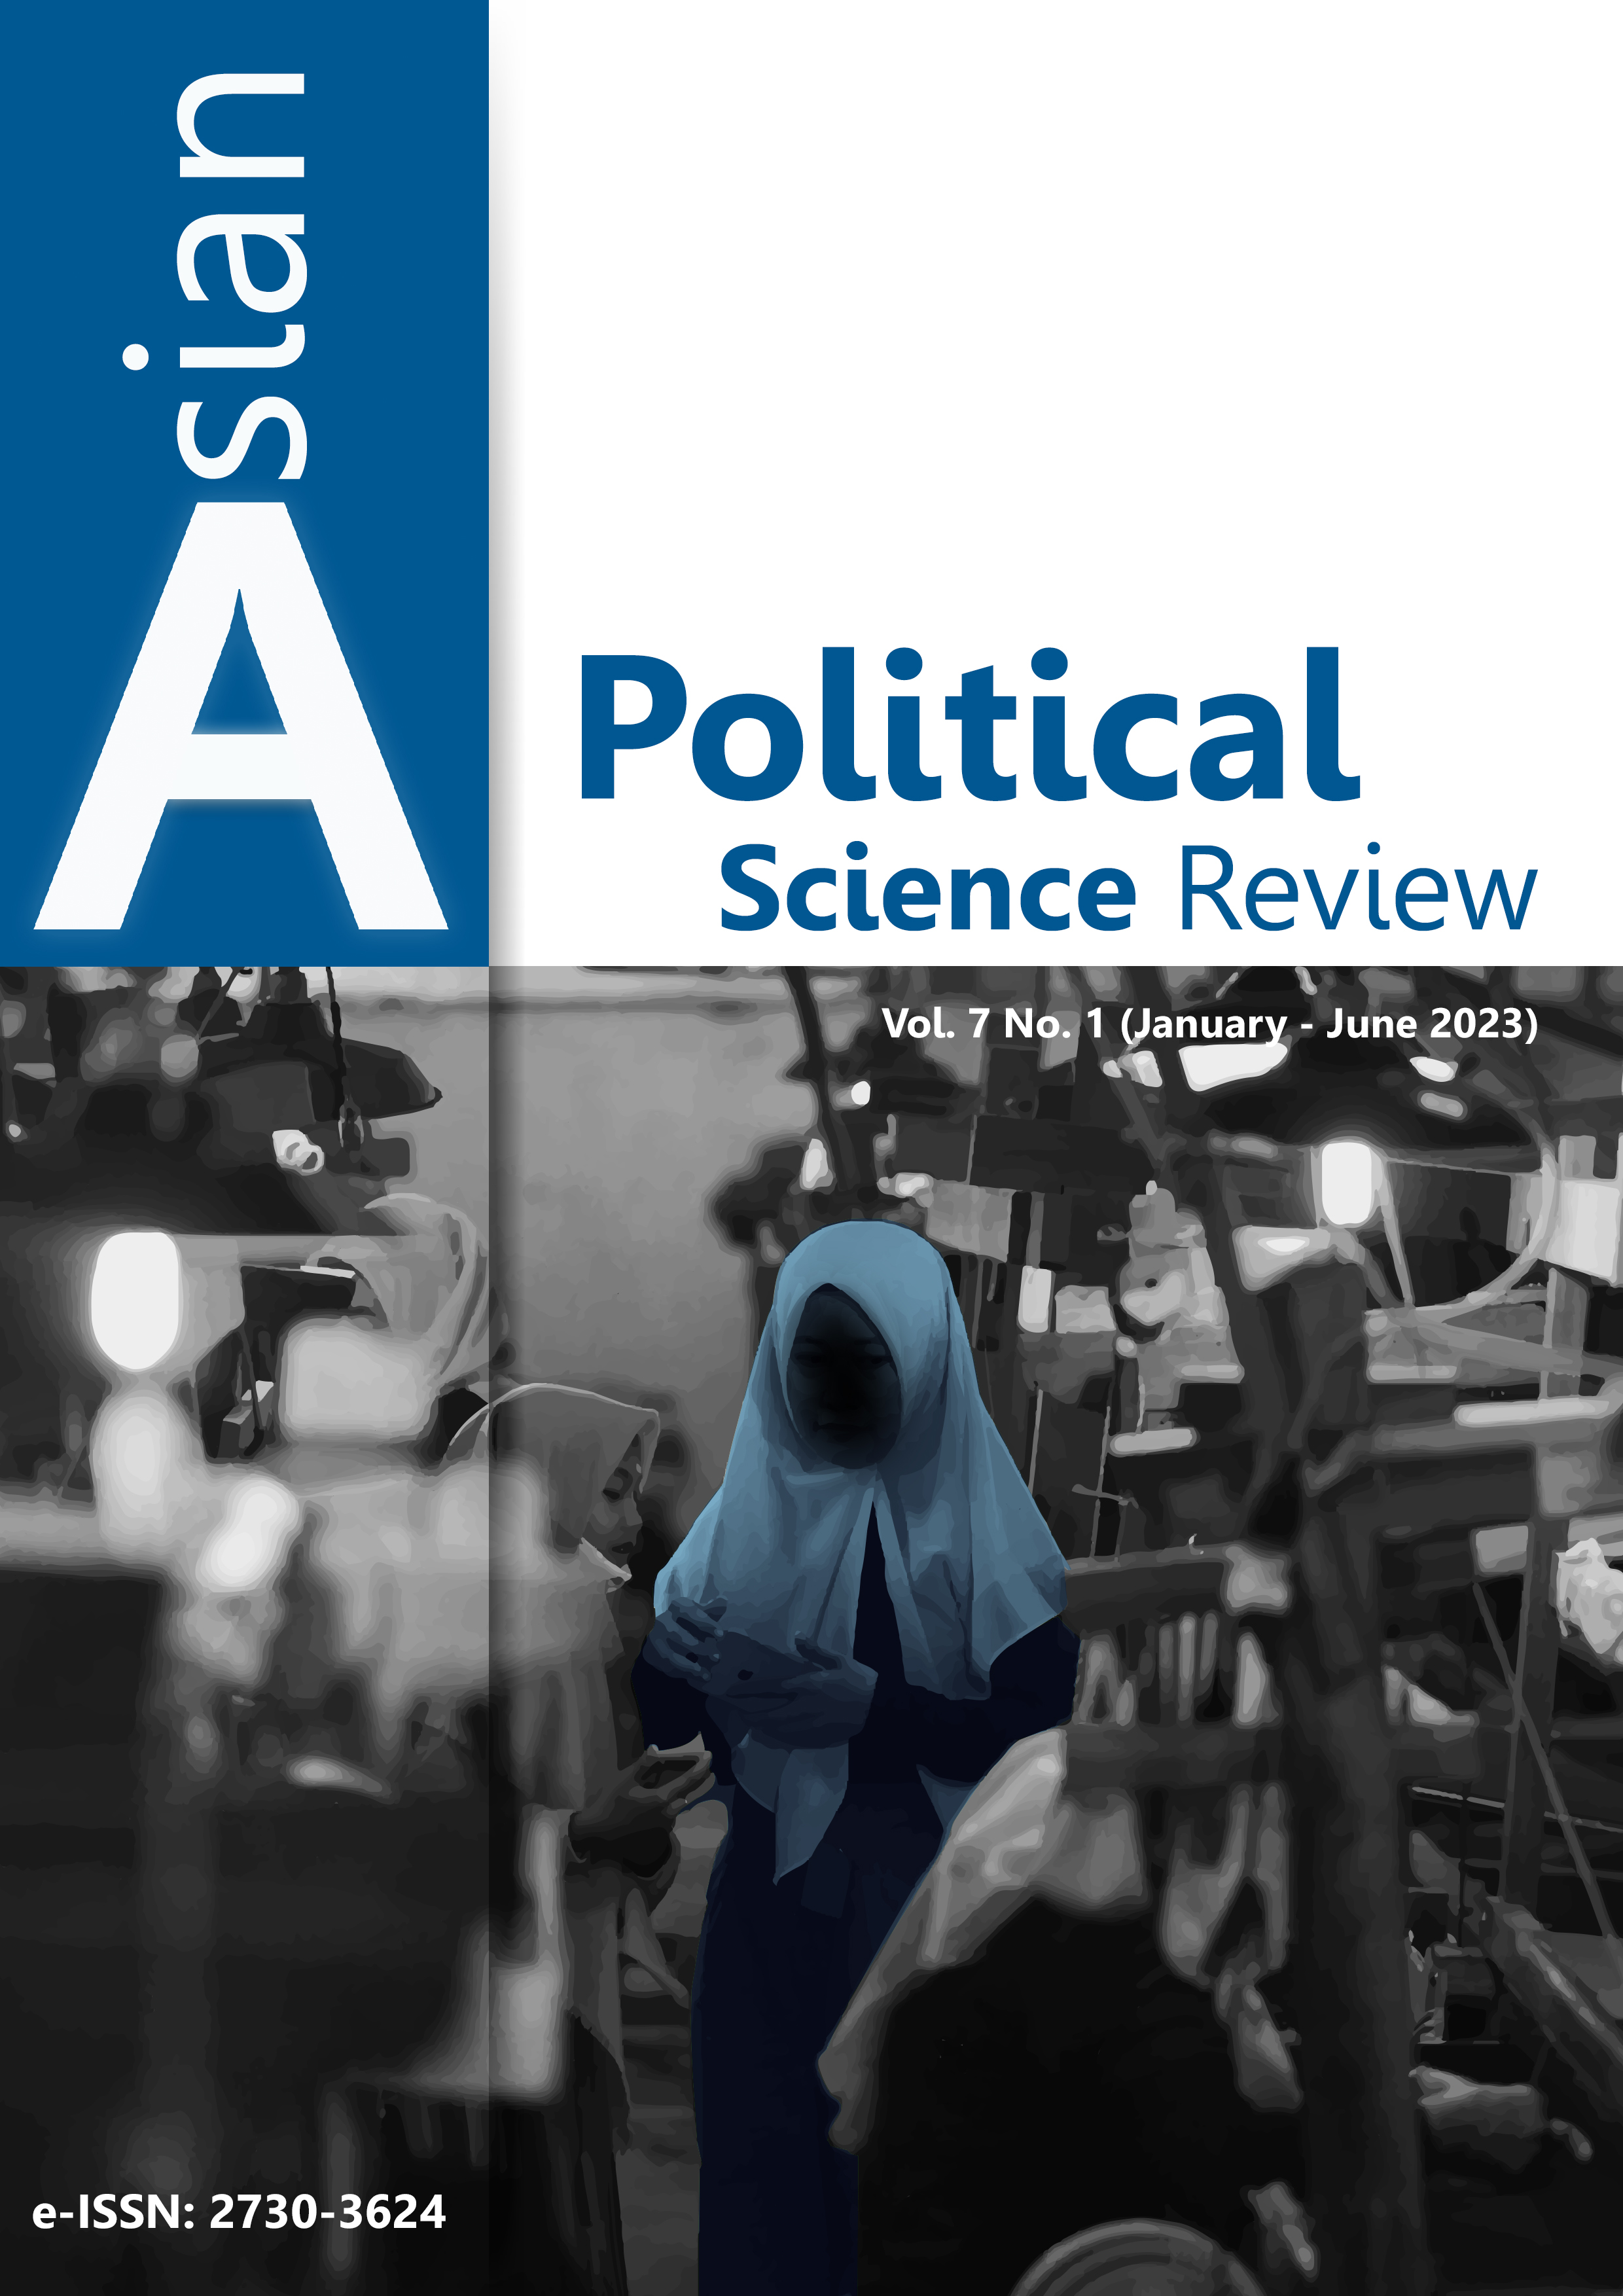 					View Vol. 7 No. 1 (2023): Asian Political Science Review
				